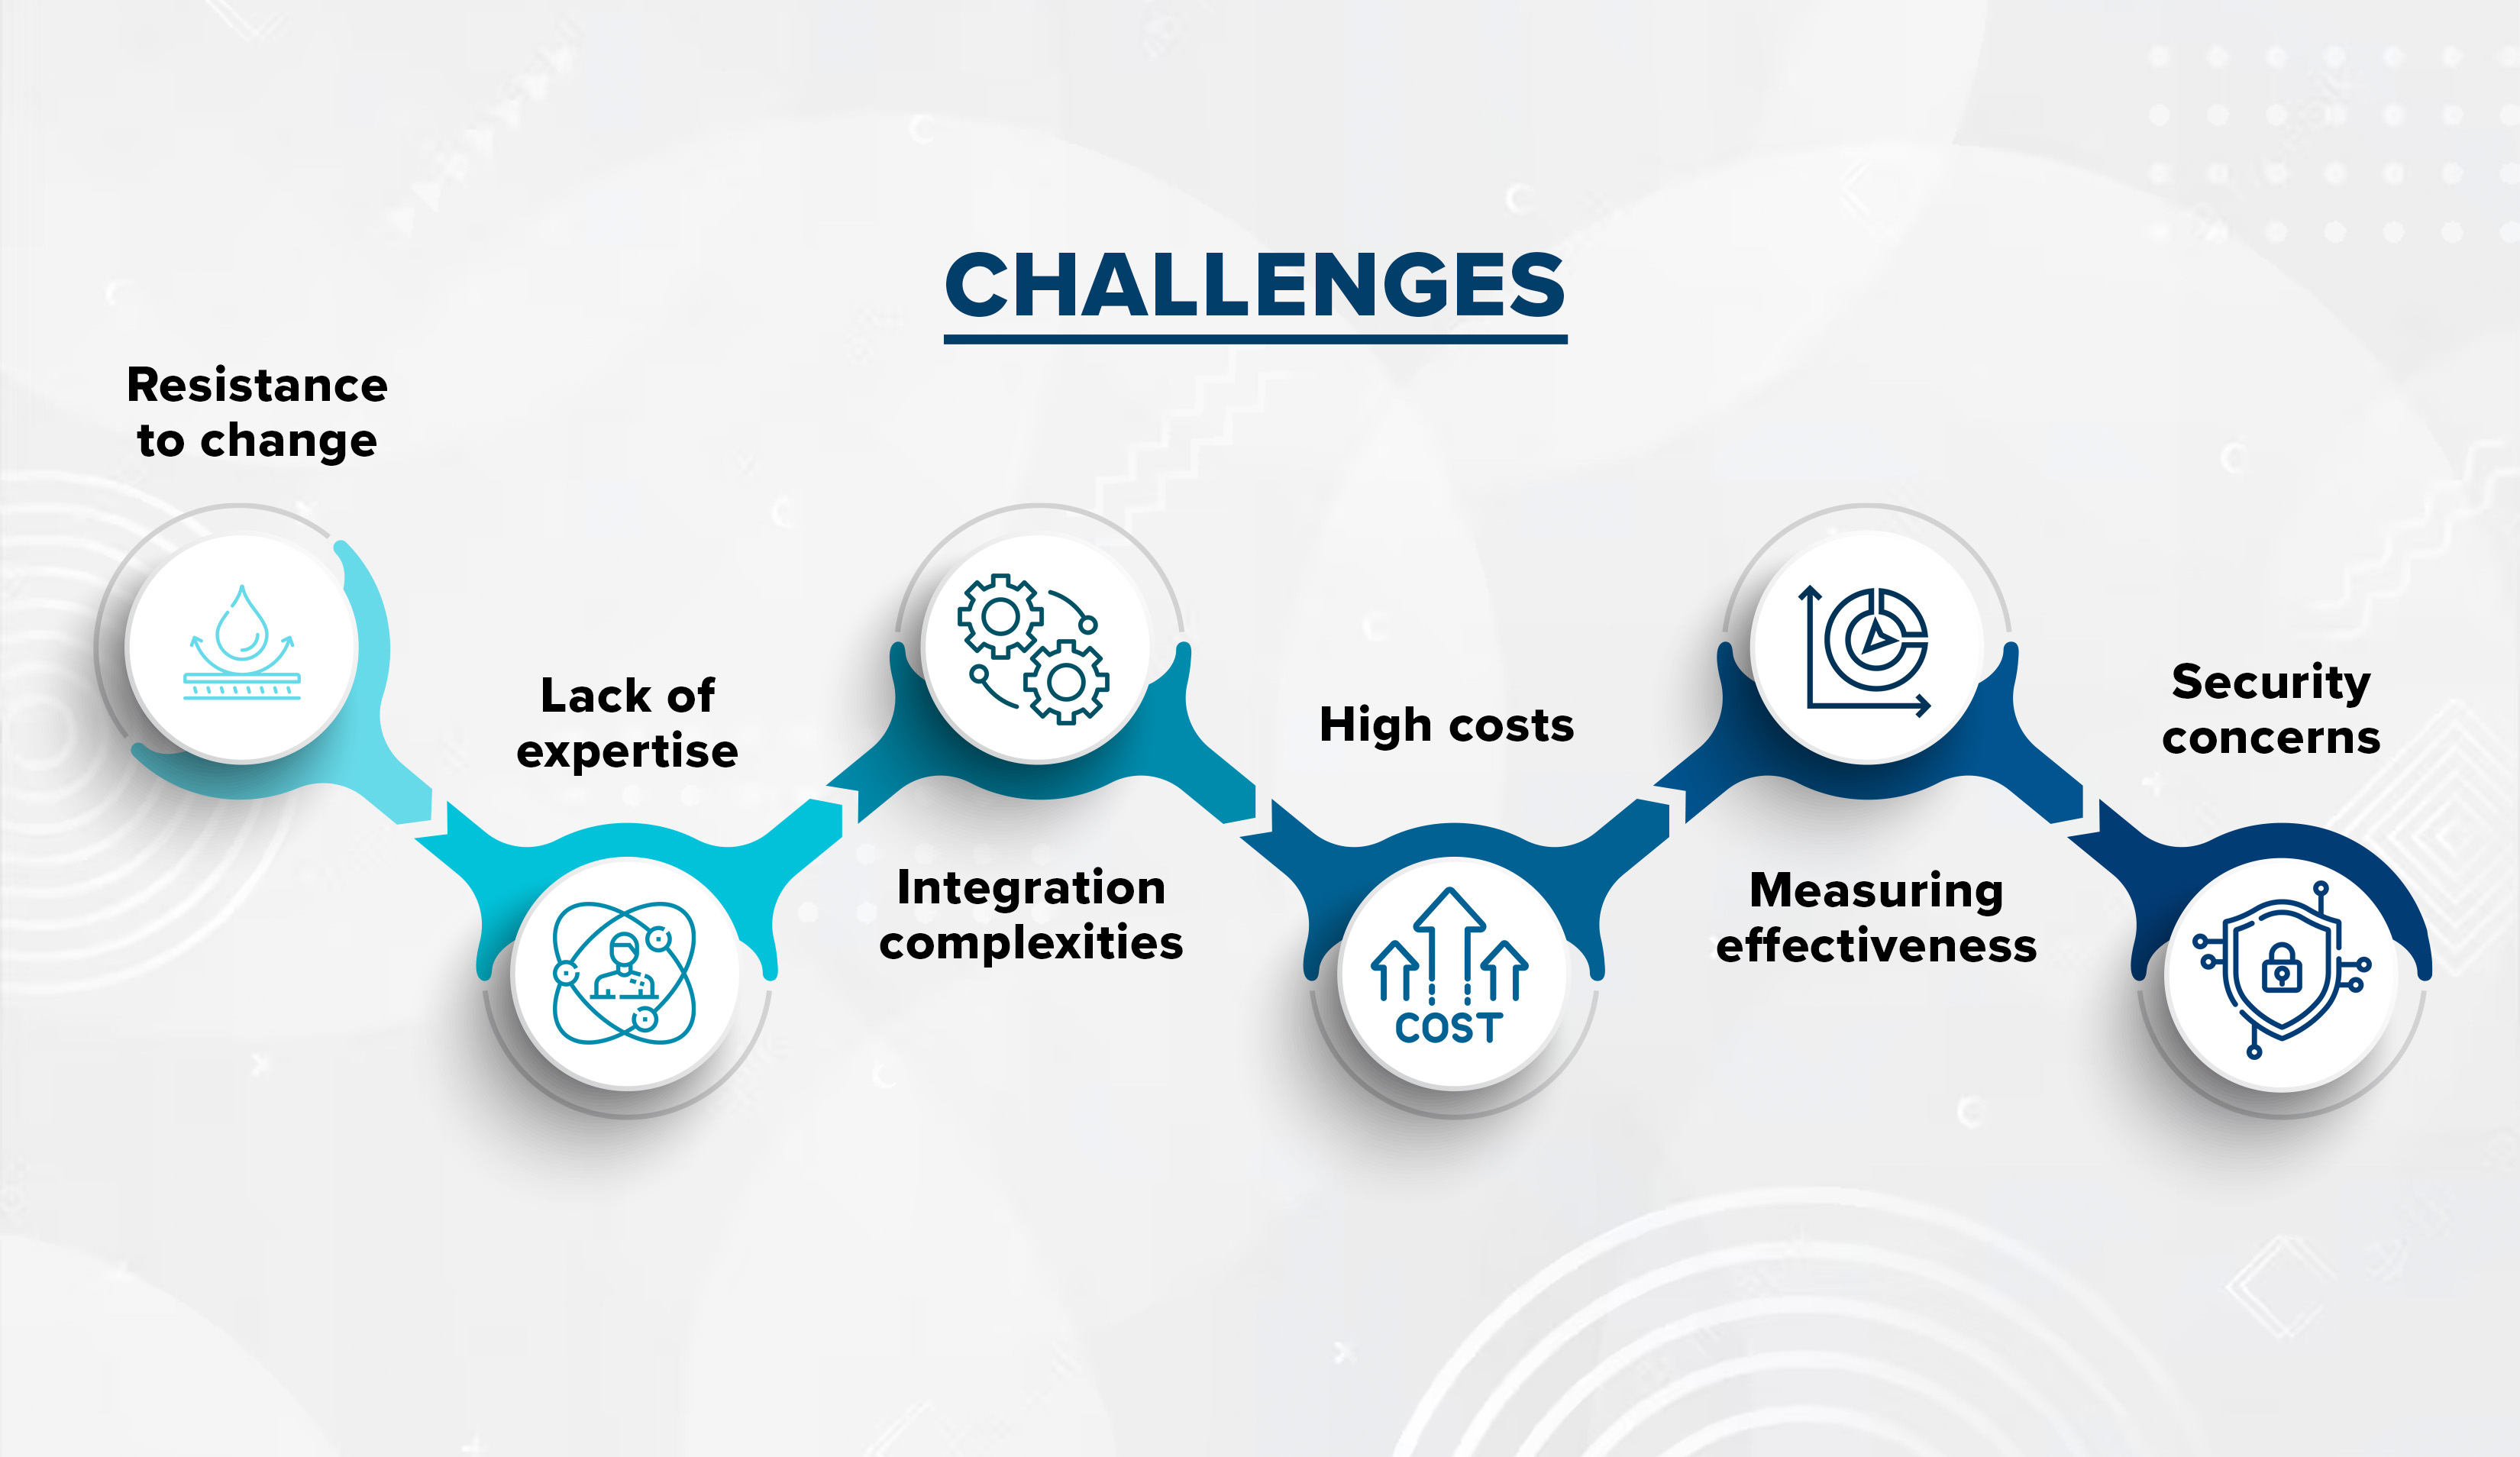 Challenges during TestOps implementation